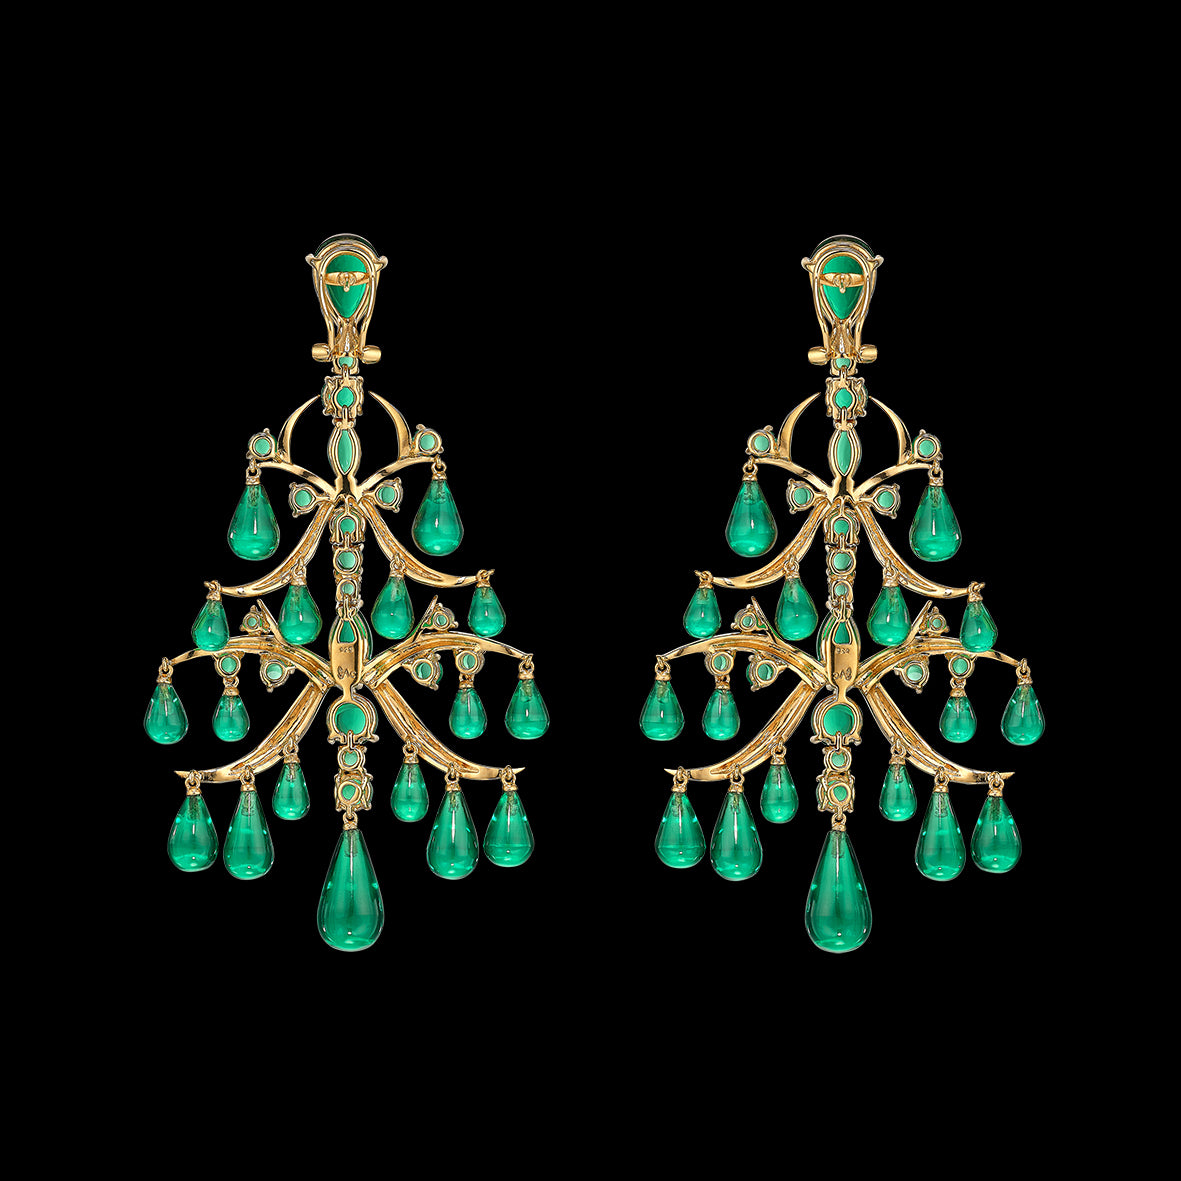 Emerald Ivy Chandelier Earrings, Earring, Anabela Chan Joaillerie - Fine jewelry with laboratory grown and created gemstones hand-crafted in the United Kingdom. Anabela Chan Joaillerie is the first fine jewellery brand in the world to champion laboratory-grown and created gemstones with high jewellery design, artisanal craftsmanship and a focus on ethical and sustainable innovations.